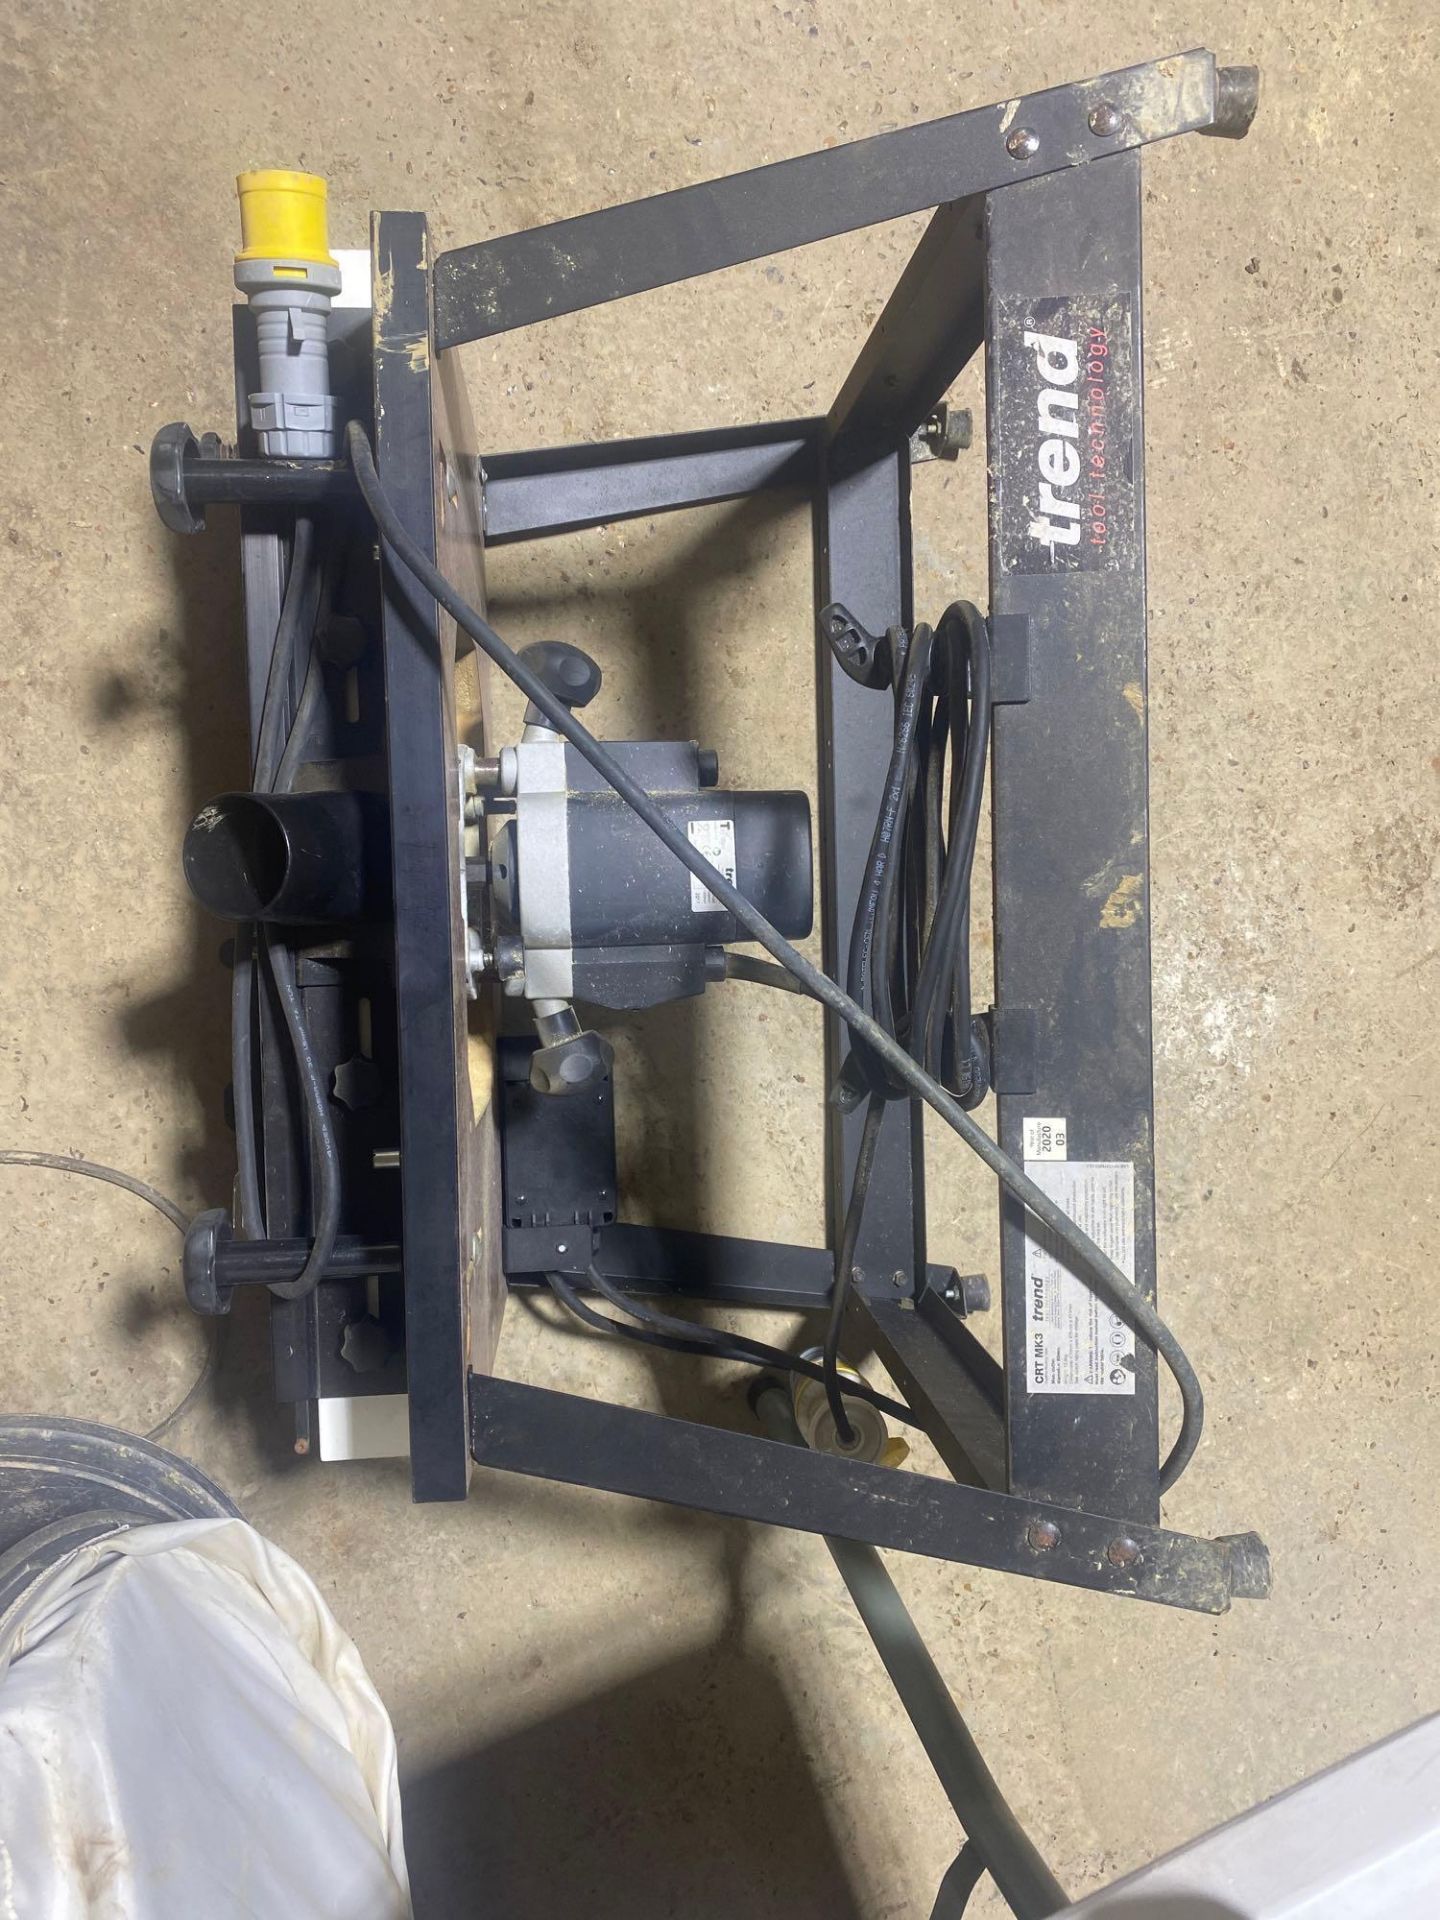 Trend T5el v2 110v router s/n:11174120 complete with router table attachment - Image 2 of 2